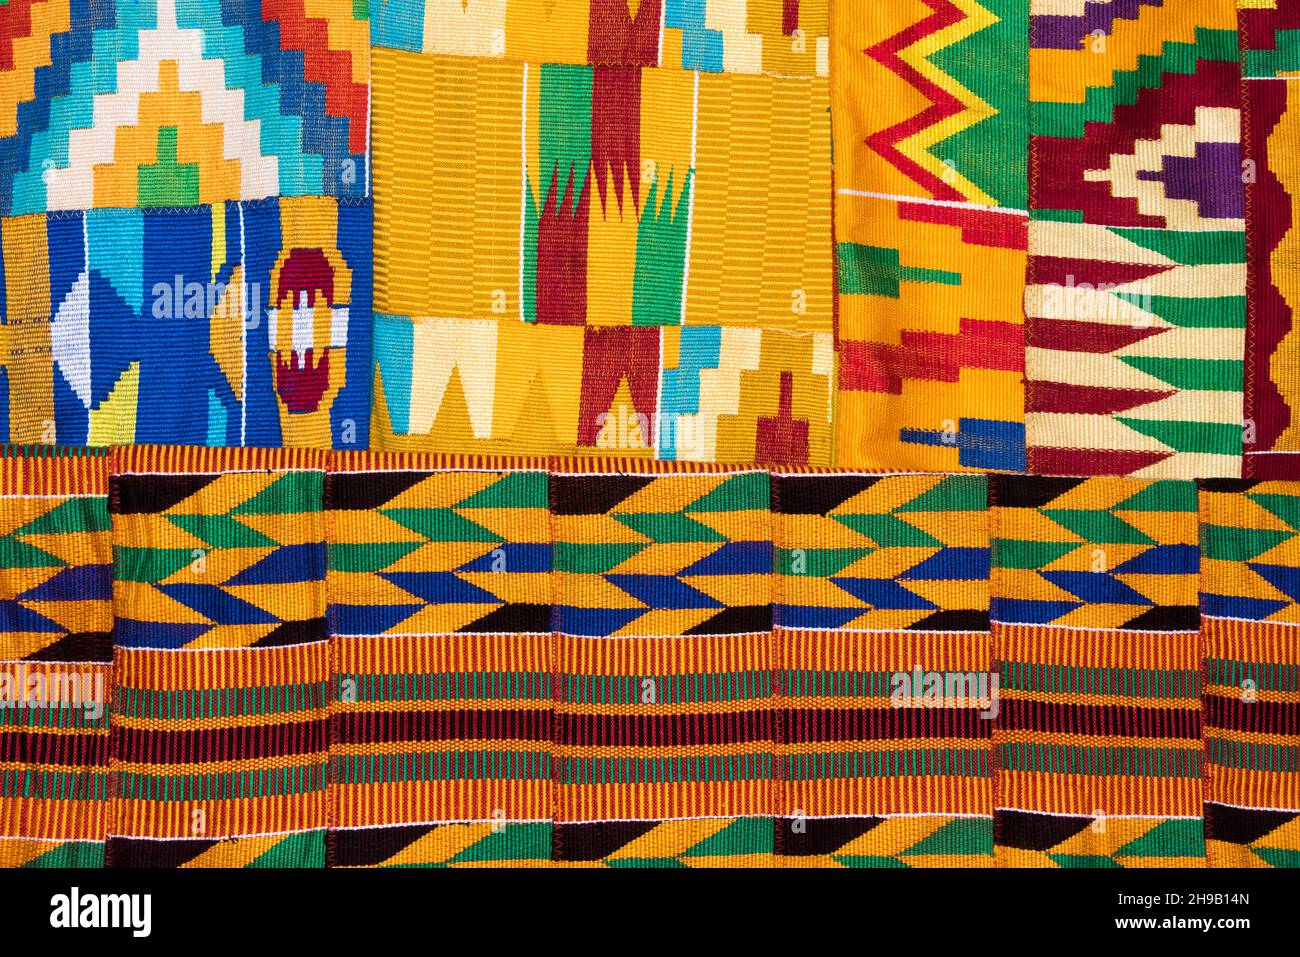 Weaving Kente cloth, a type of silk and cotton fabric made of interwoven cloth strips made and native to the Akan ethnic group of Ghana, Ashanti Regio Stock Photo